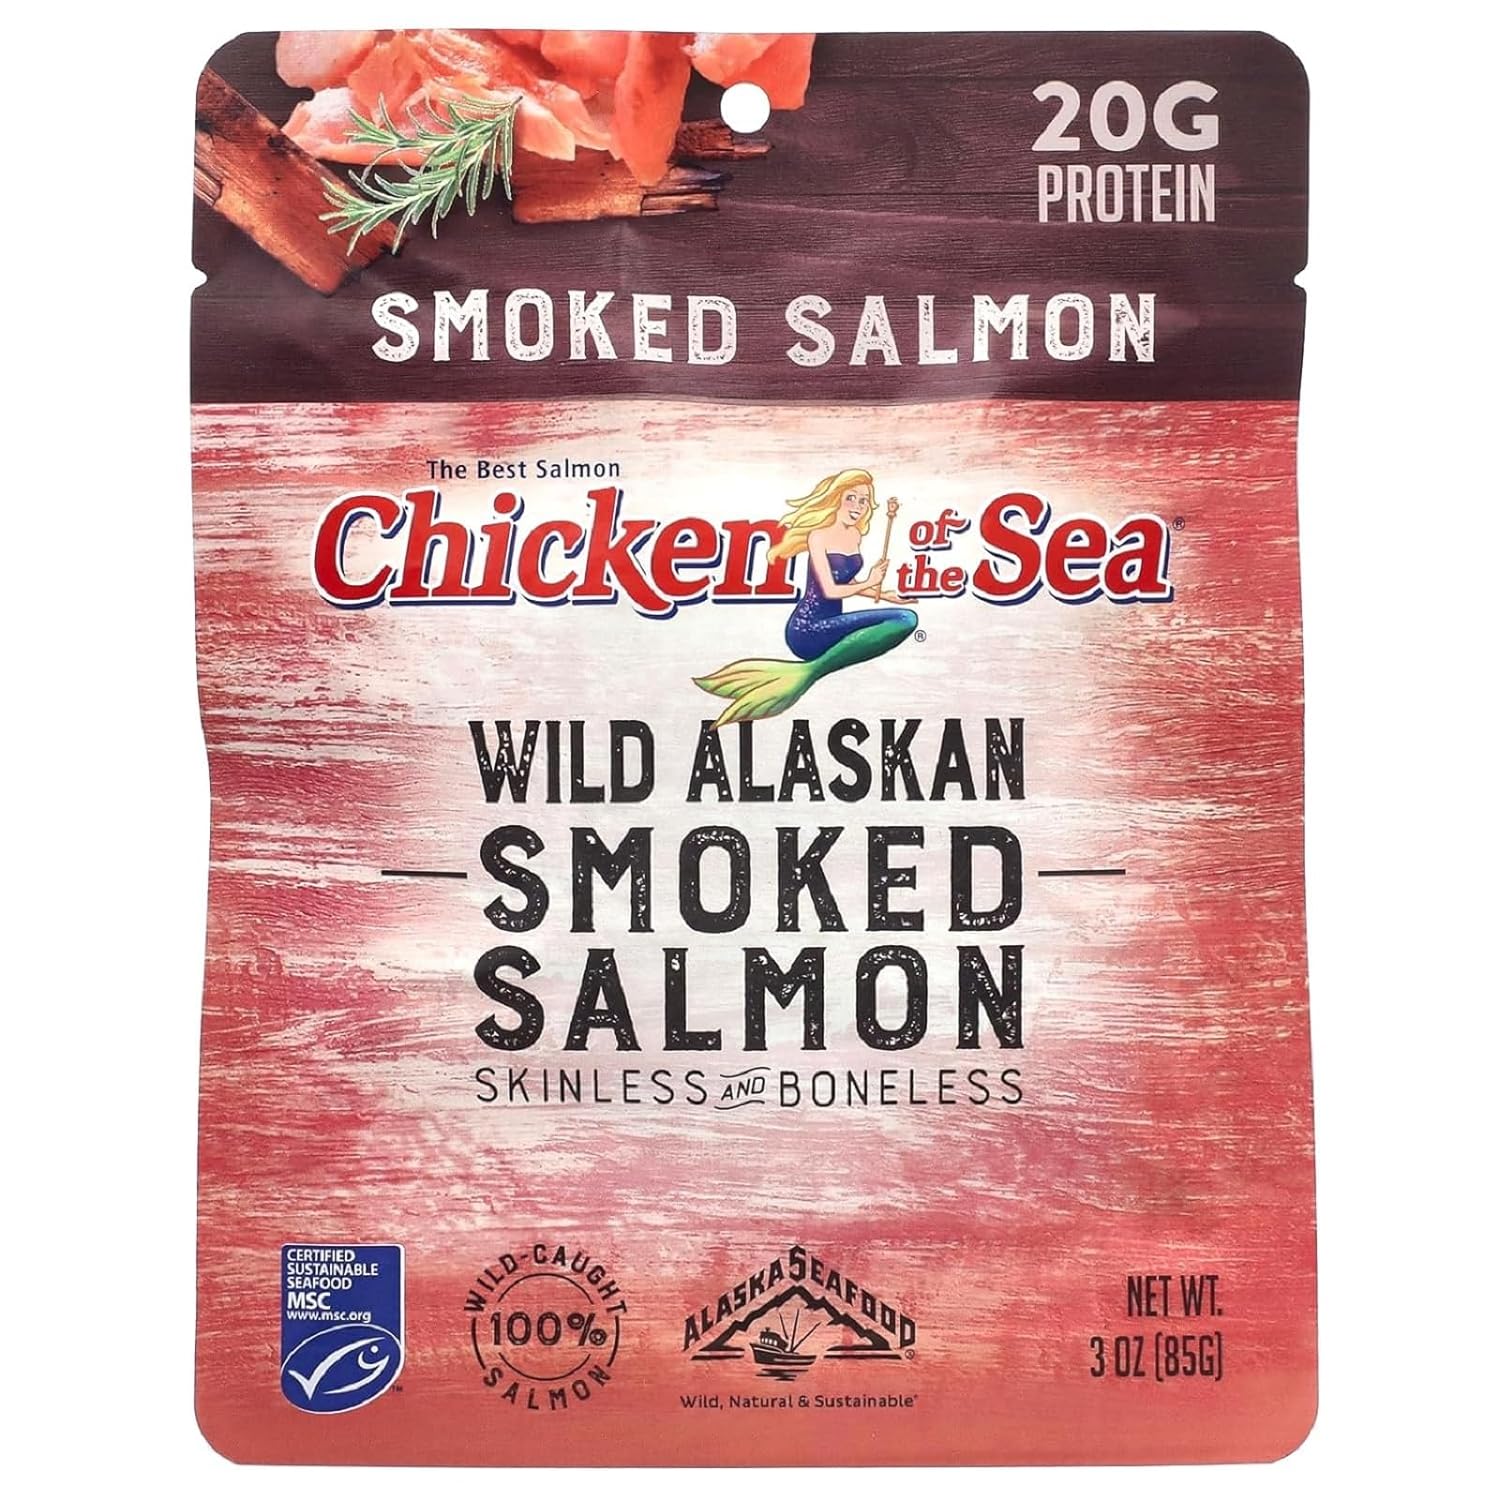 Chicken of the Sea Smoked Salmon 3oz Pouch